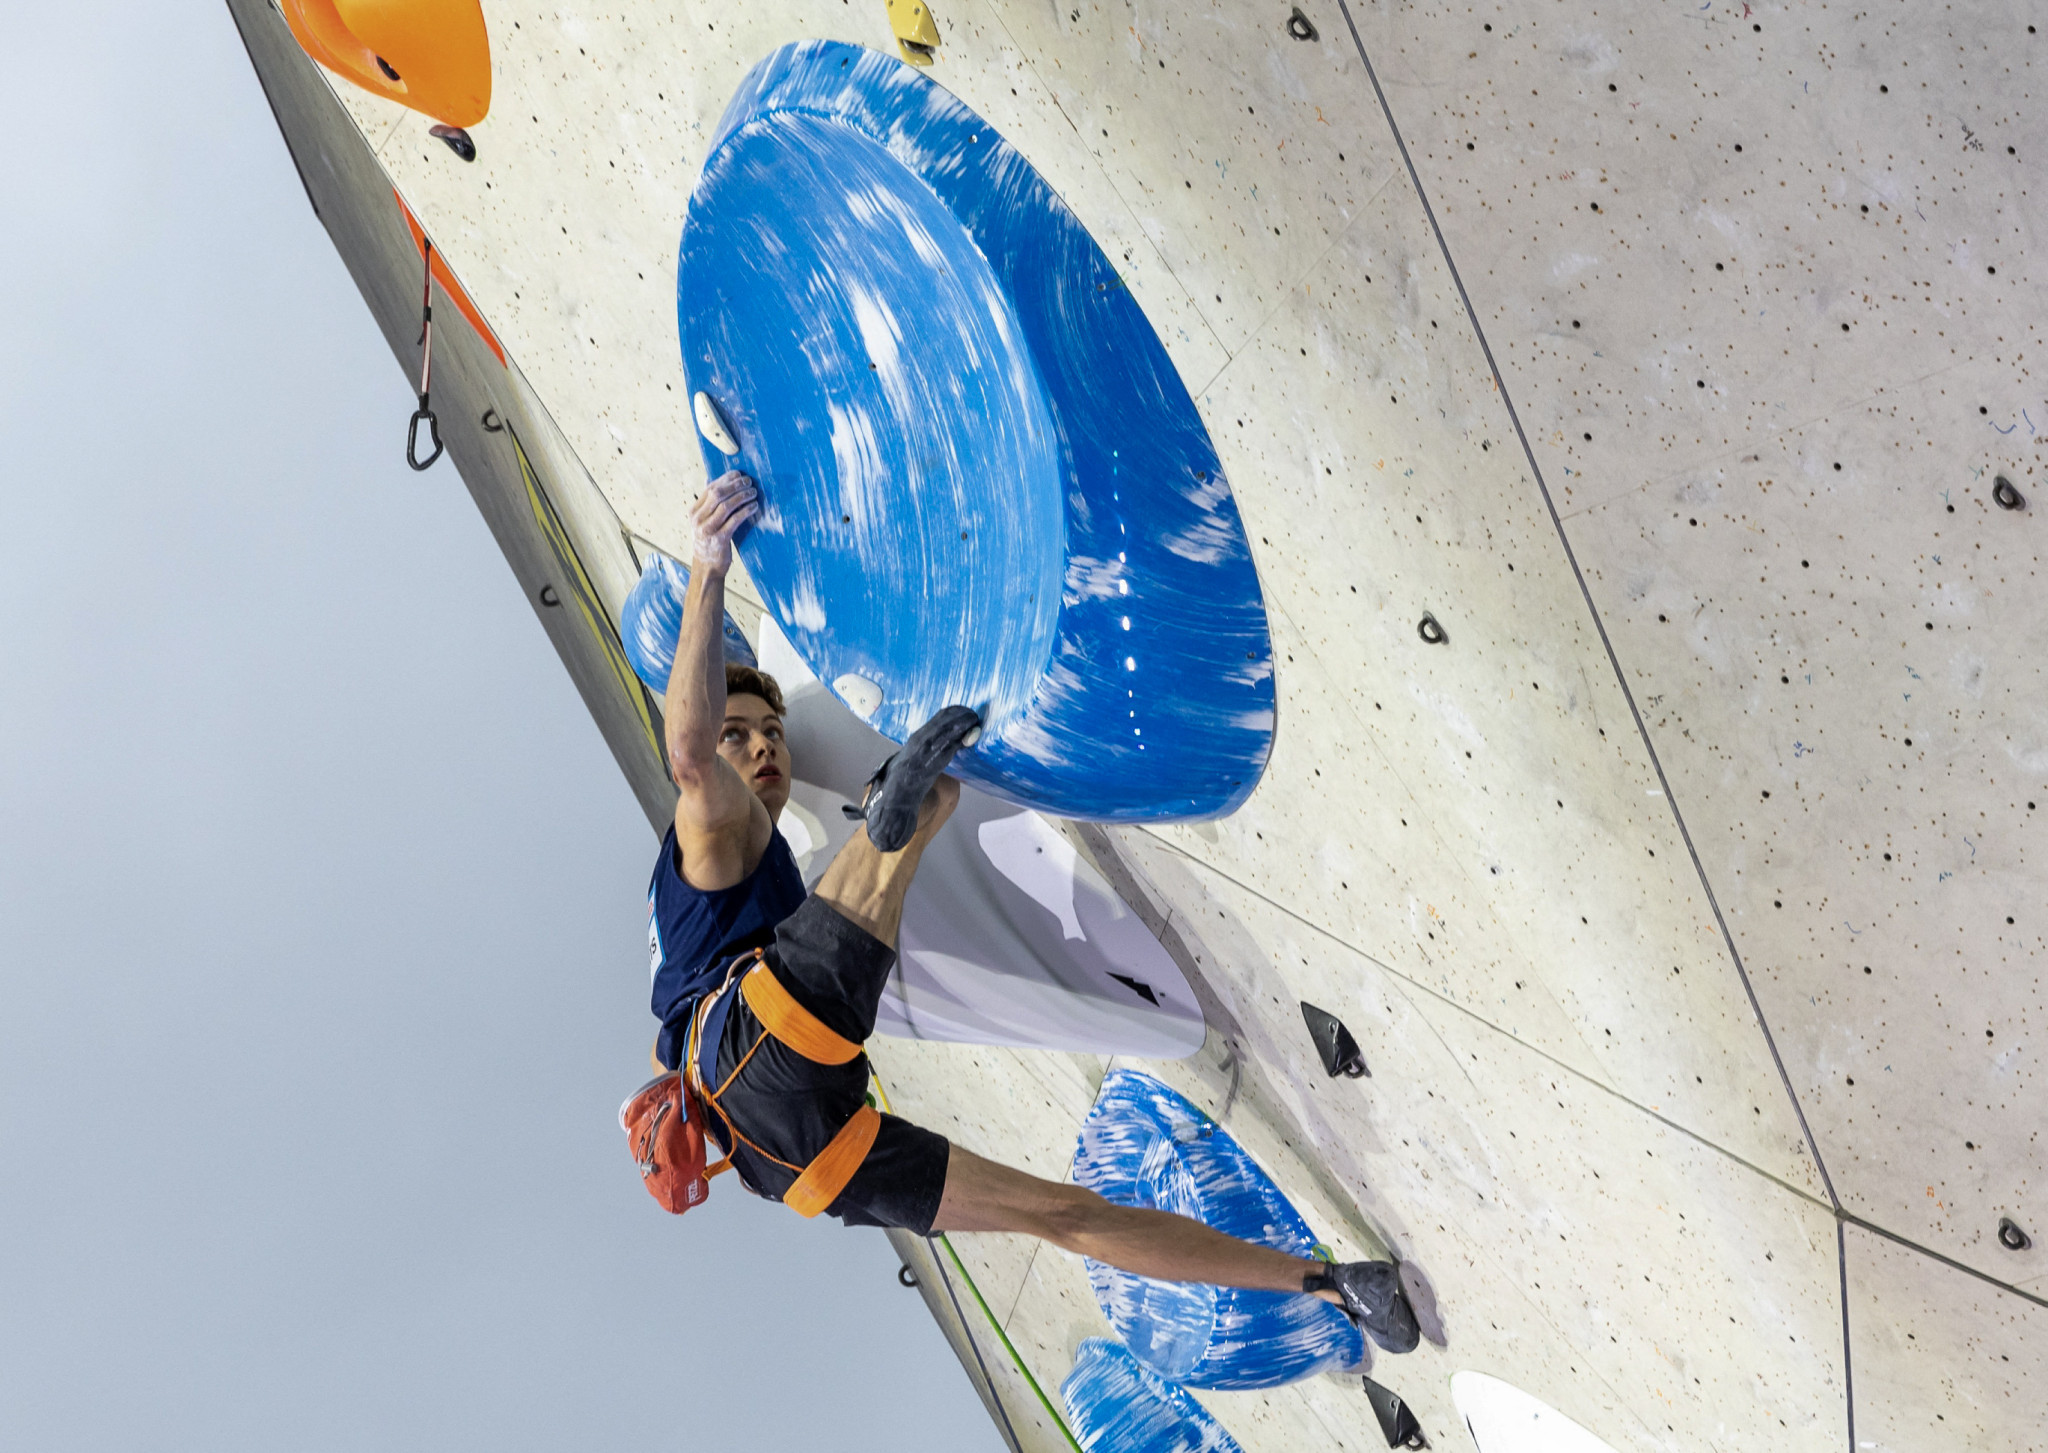 Toby Roberts has secured his place in Olympic climbing history as the first British male qualifier. GETTY IMAGES